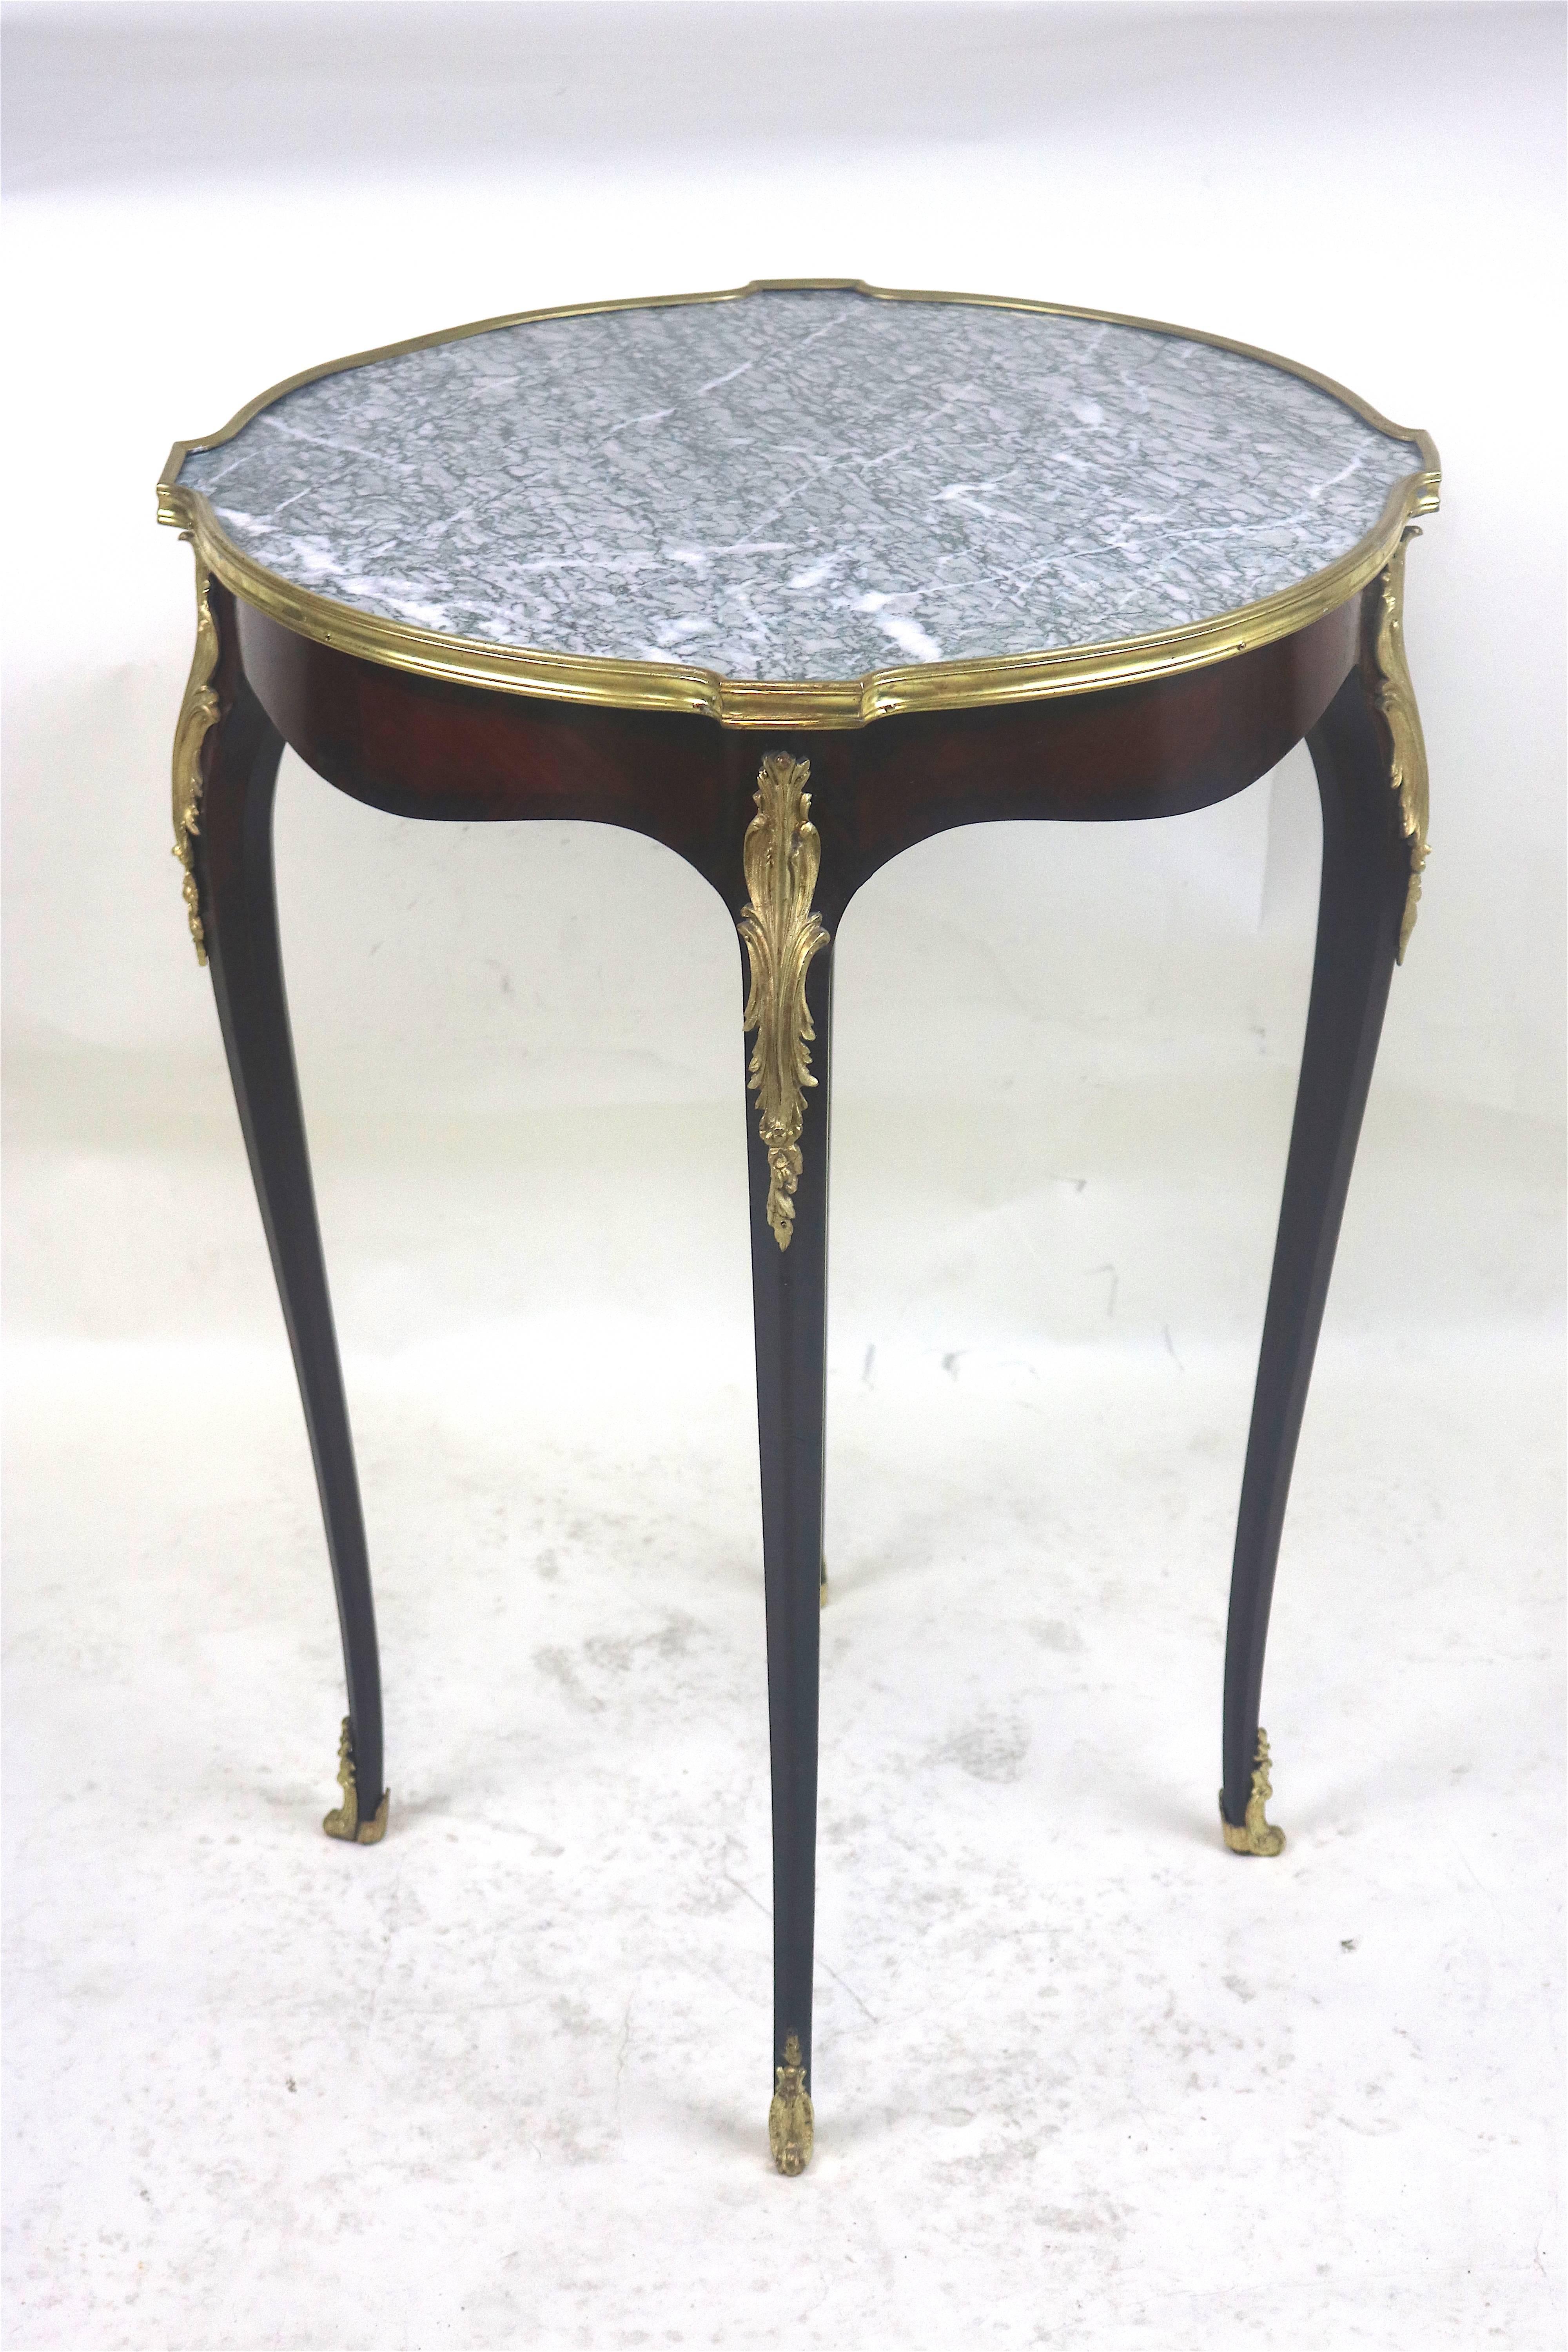 Late 18th/early 19th century Refined  beautiful Louis XV style Gueridon Table  with lovely patina, mahogany marquetry with darker mahogany bordered inlay design, refined proportions-fine gilt bronze trim, ormolu cabriole leg mount and ormolu clad